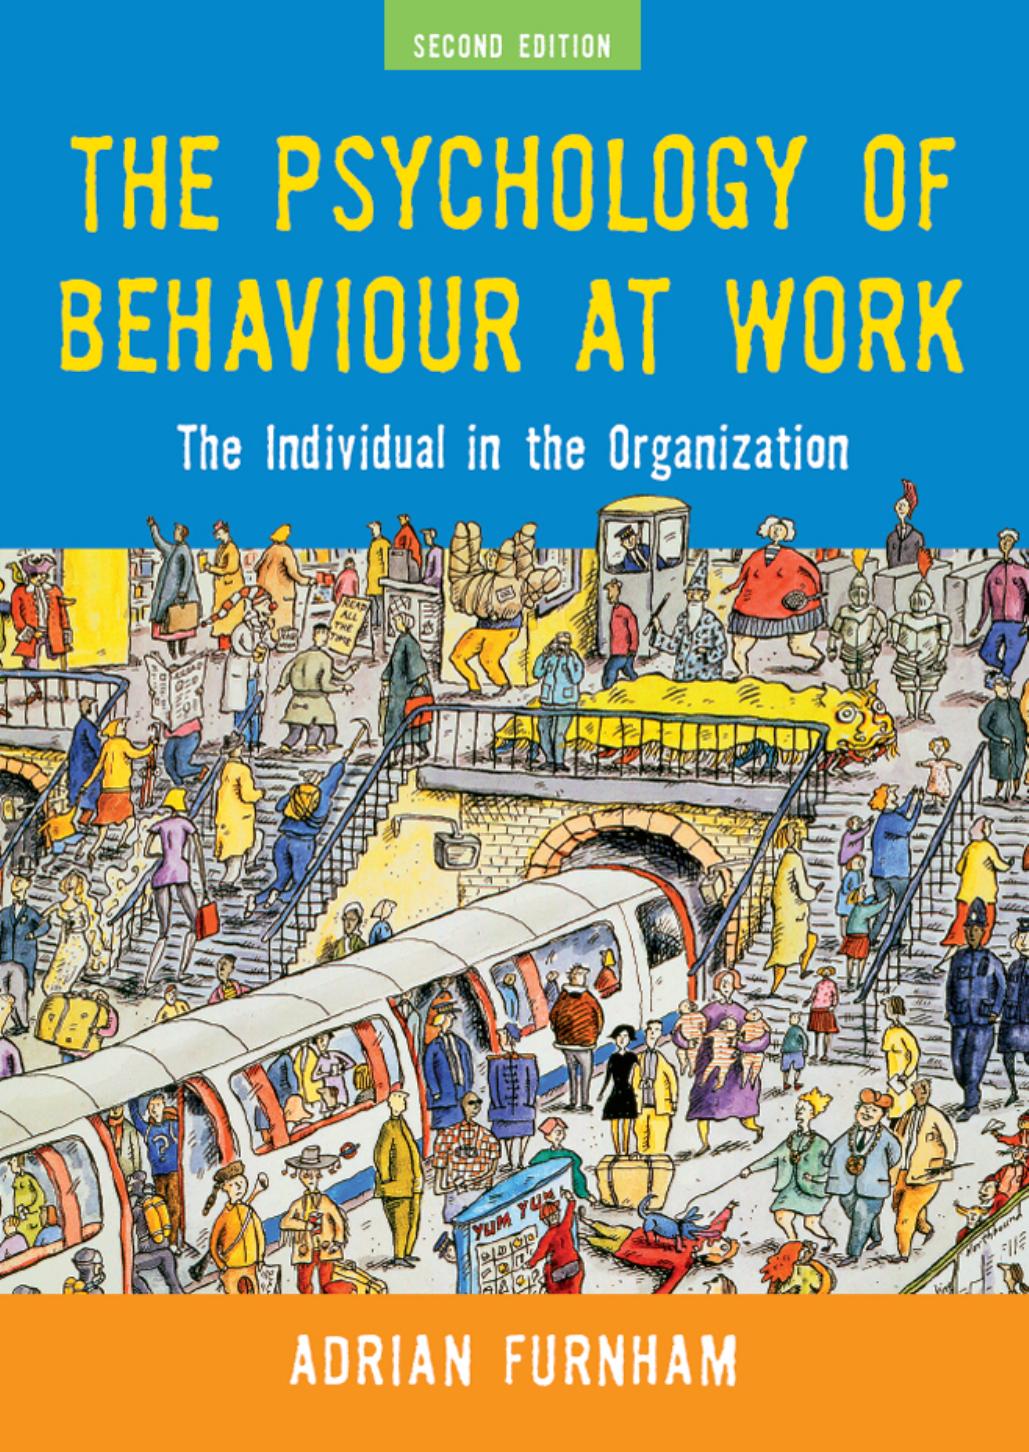 Psychology of Behaviour at Work: The Individual in the Organization  by Furnham, Adrian